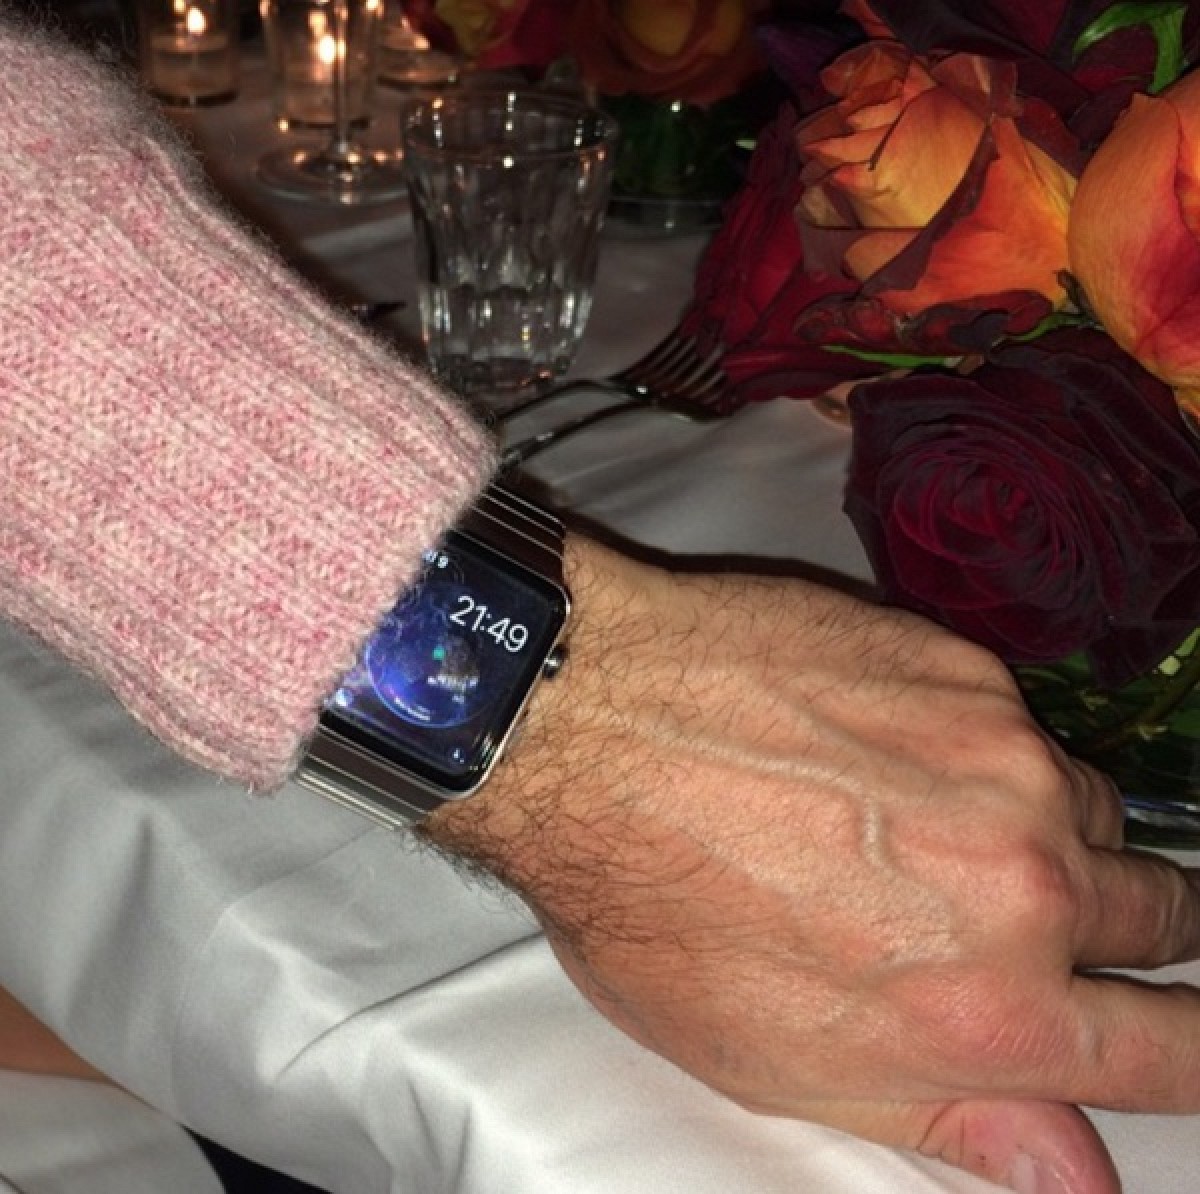 Official Launch, Apple Watch Begins to Make an Appearance